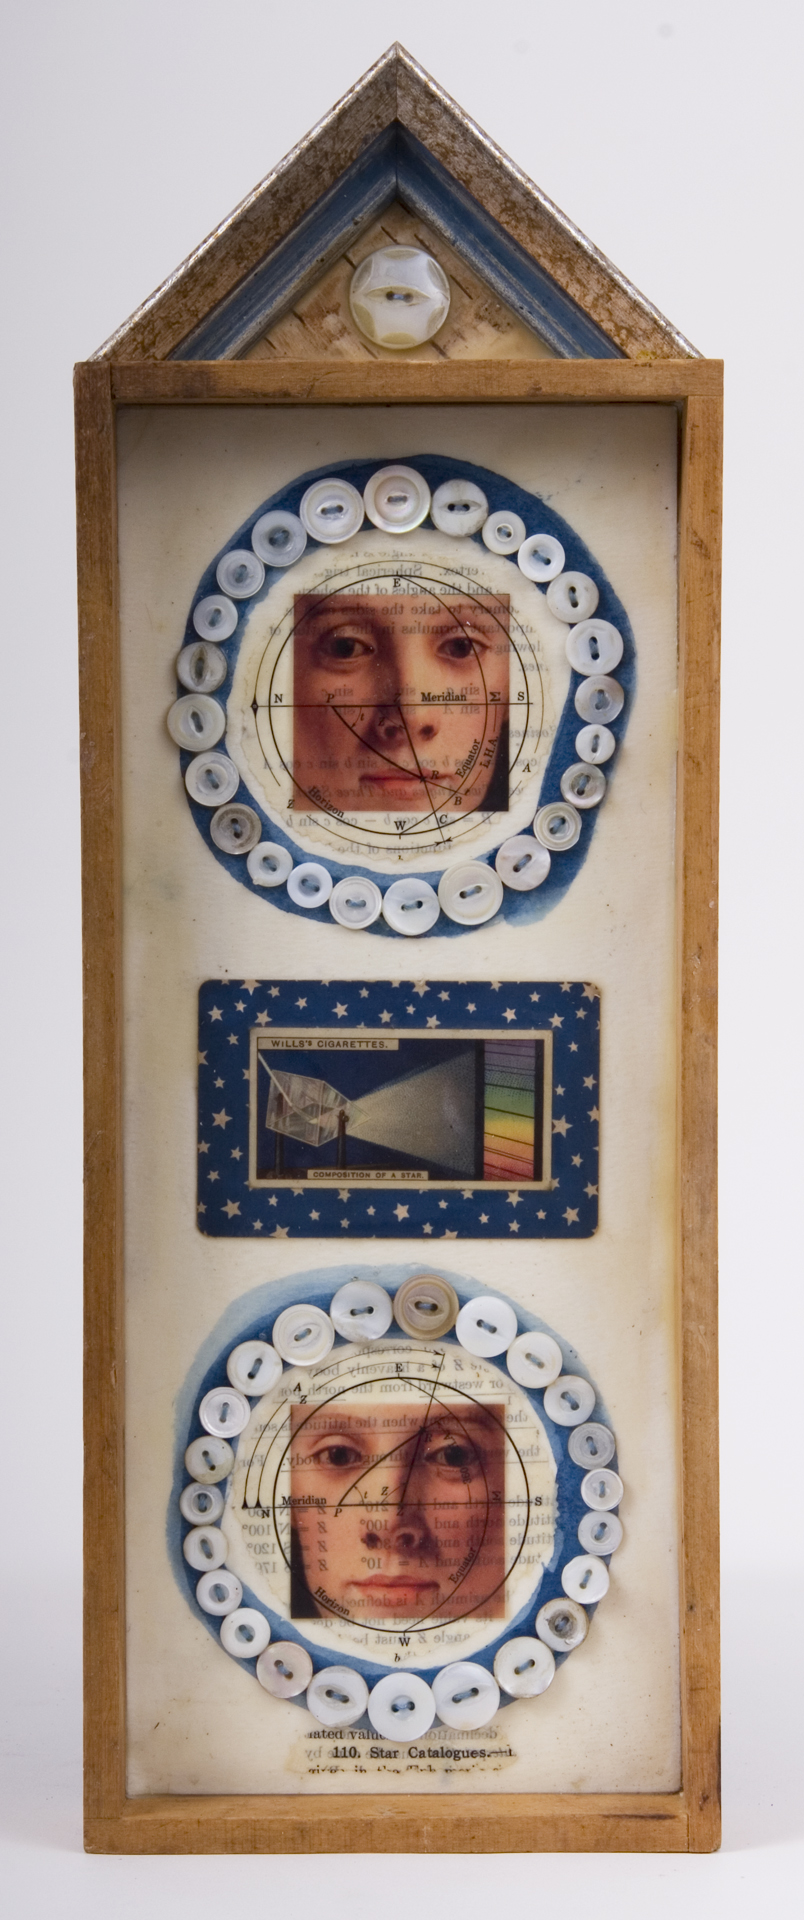     \"110. Star Catalogues\"
    mixed-media assemblage
    15.5 x 5.5 x 1.75
    2009
    SOLD
    Wood box, frame sample, birch bark, mother of pearl buttons, transparencies, fortune & tobac cards, ink, wax, astronomy text on watercolor paper